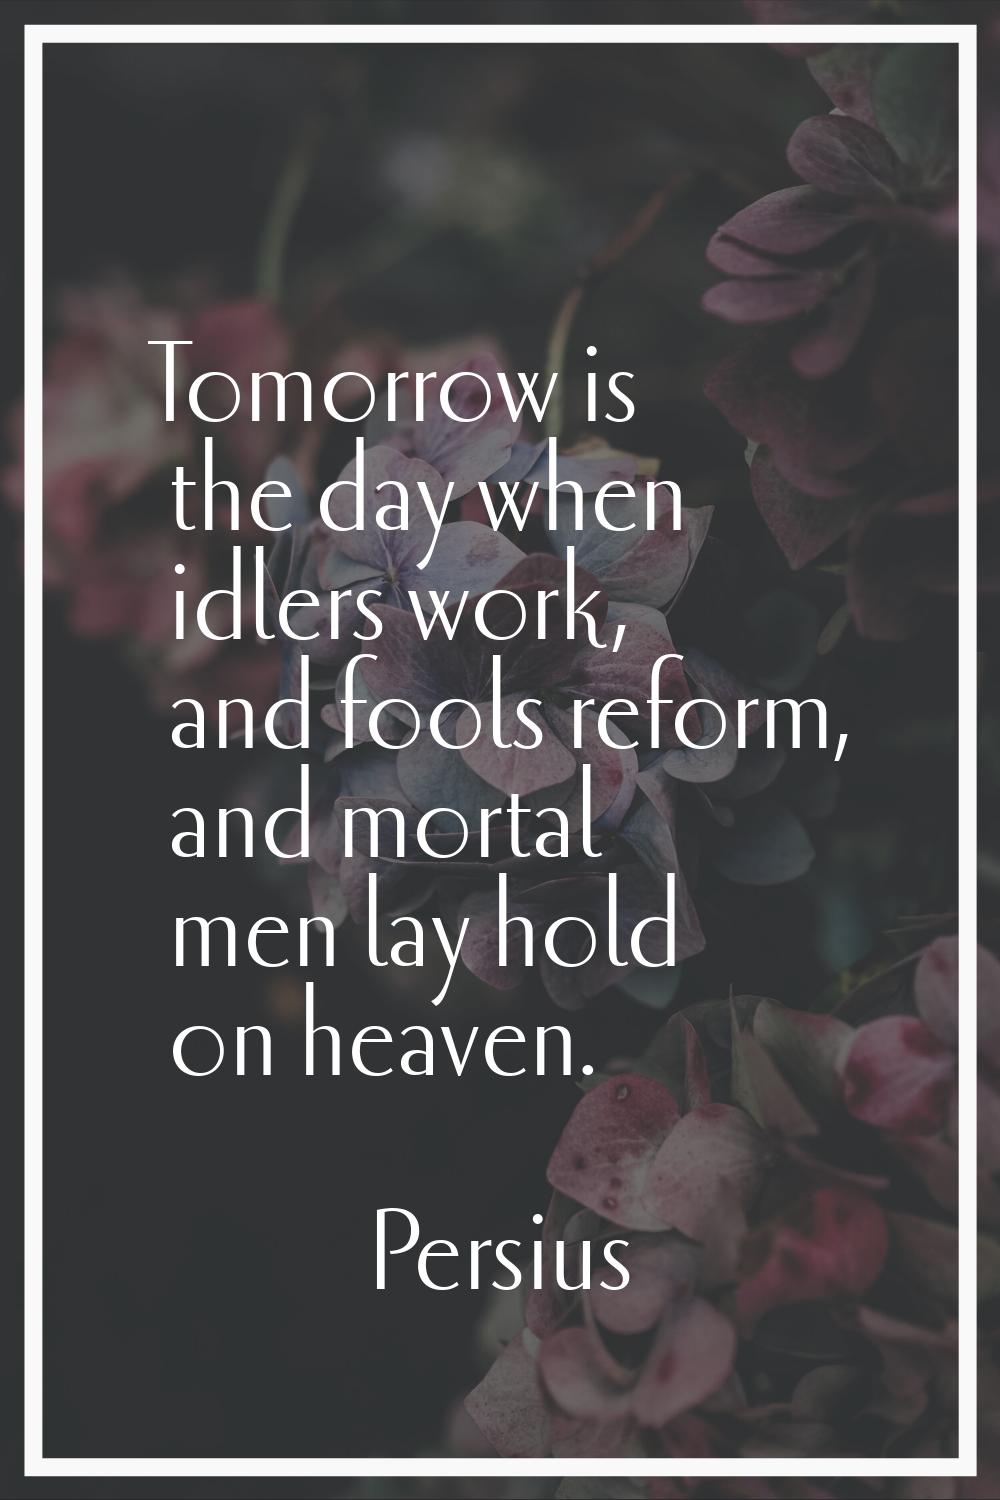 Tomorrow is the day when idlers work, and fools reform, and mortal men lay hold on heaven.